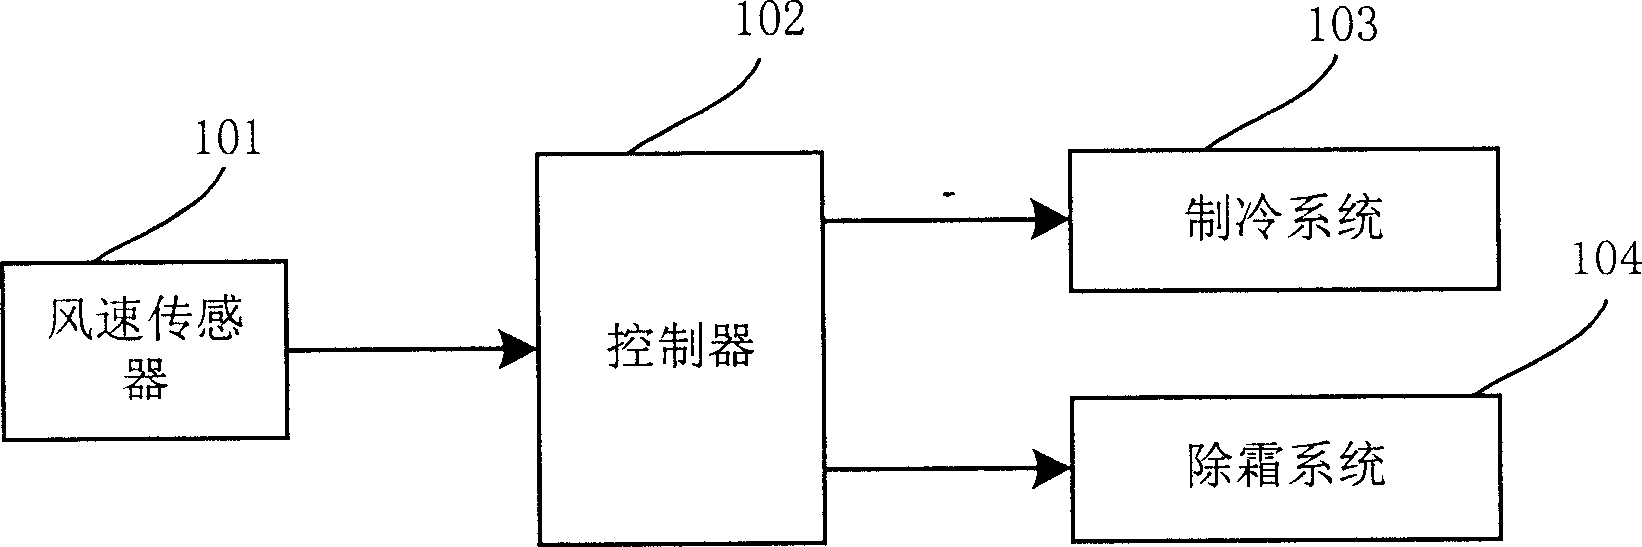 Automatic evaporator defrosting on-off control method